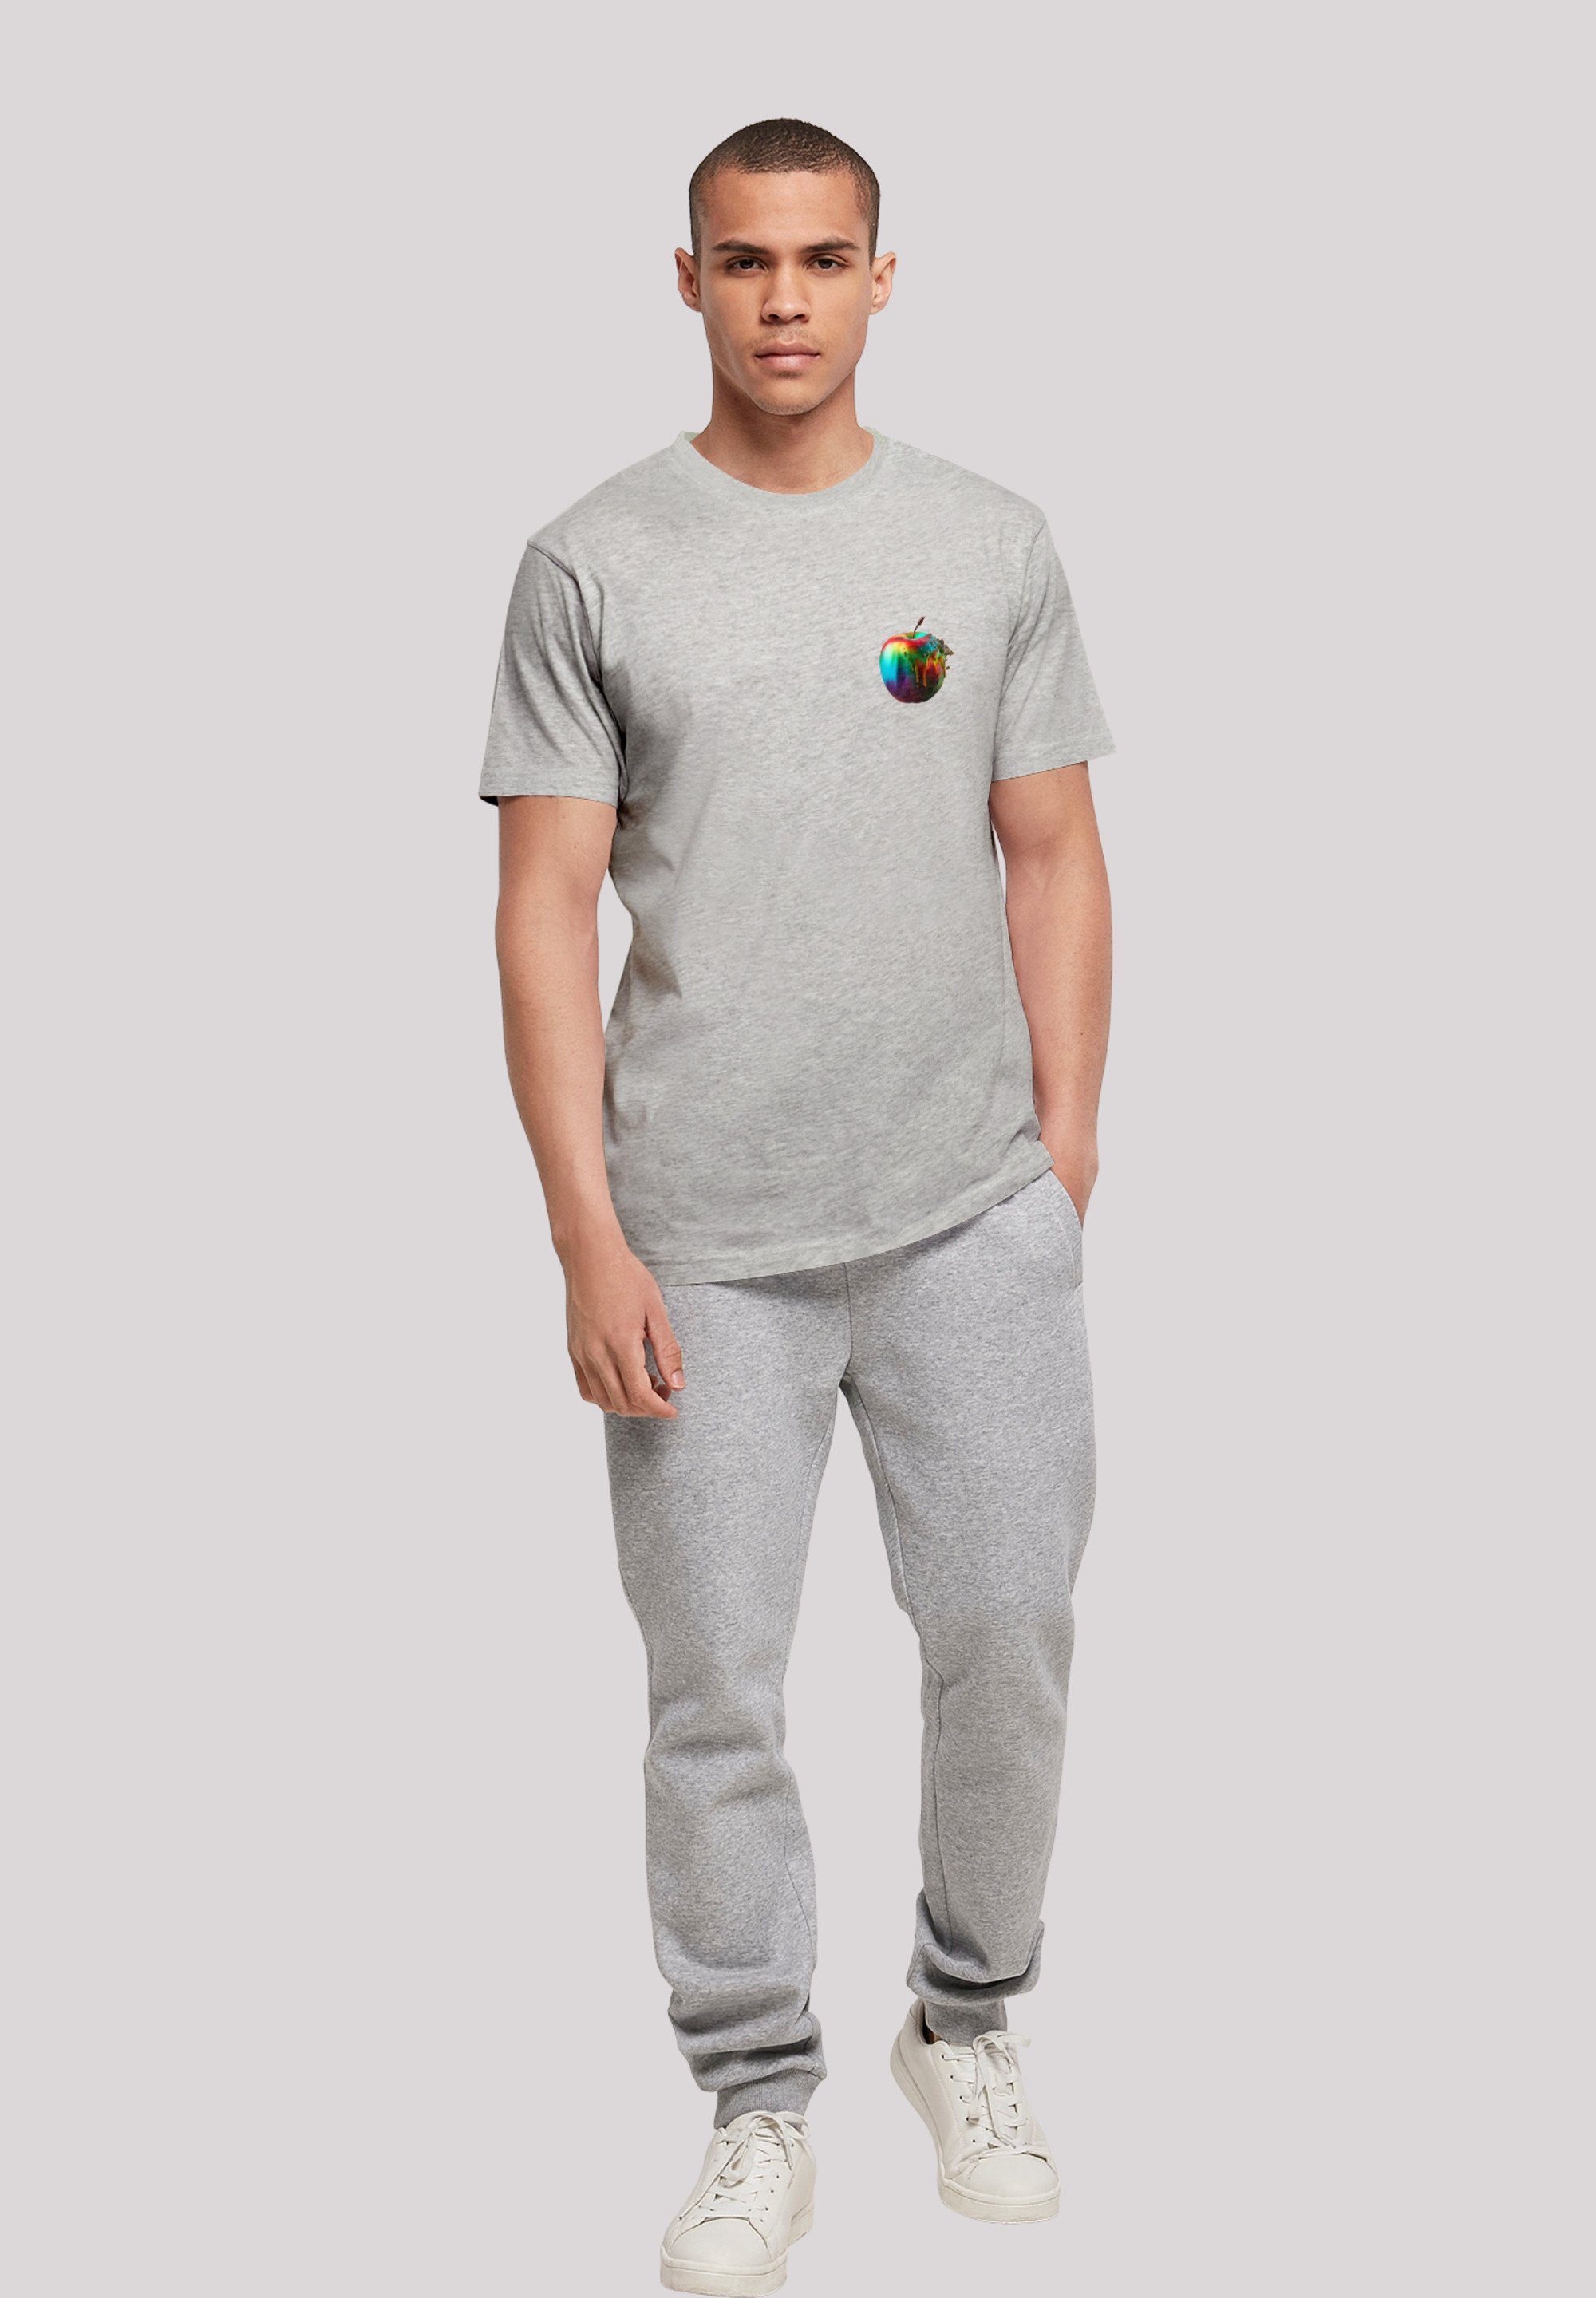 F4NT4STIC T-Shirt Rainbow heather grey - Collection Apple Colorfood Print